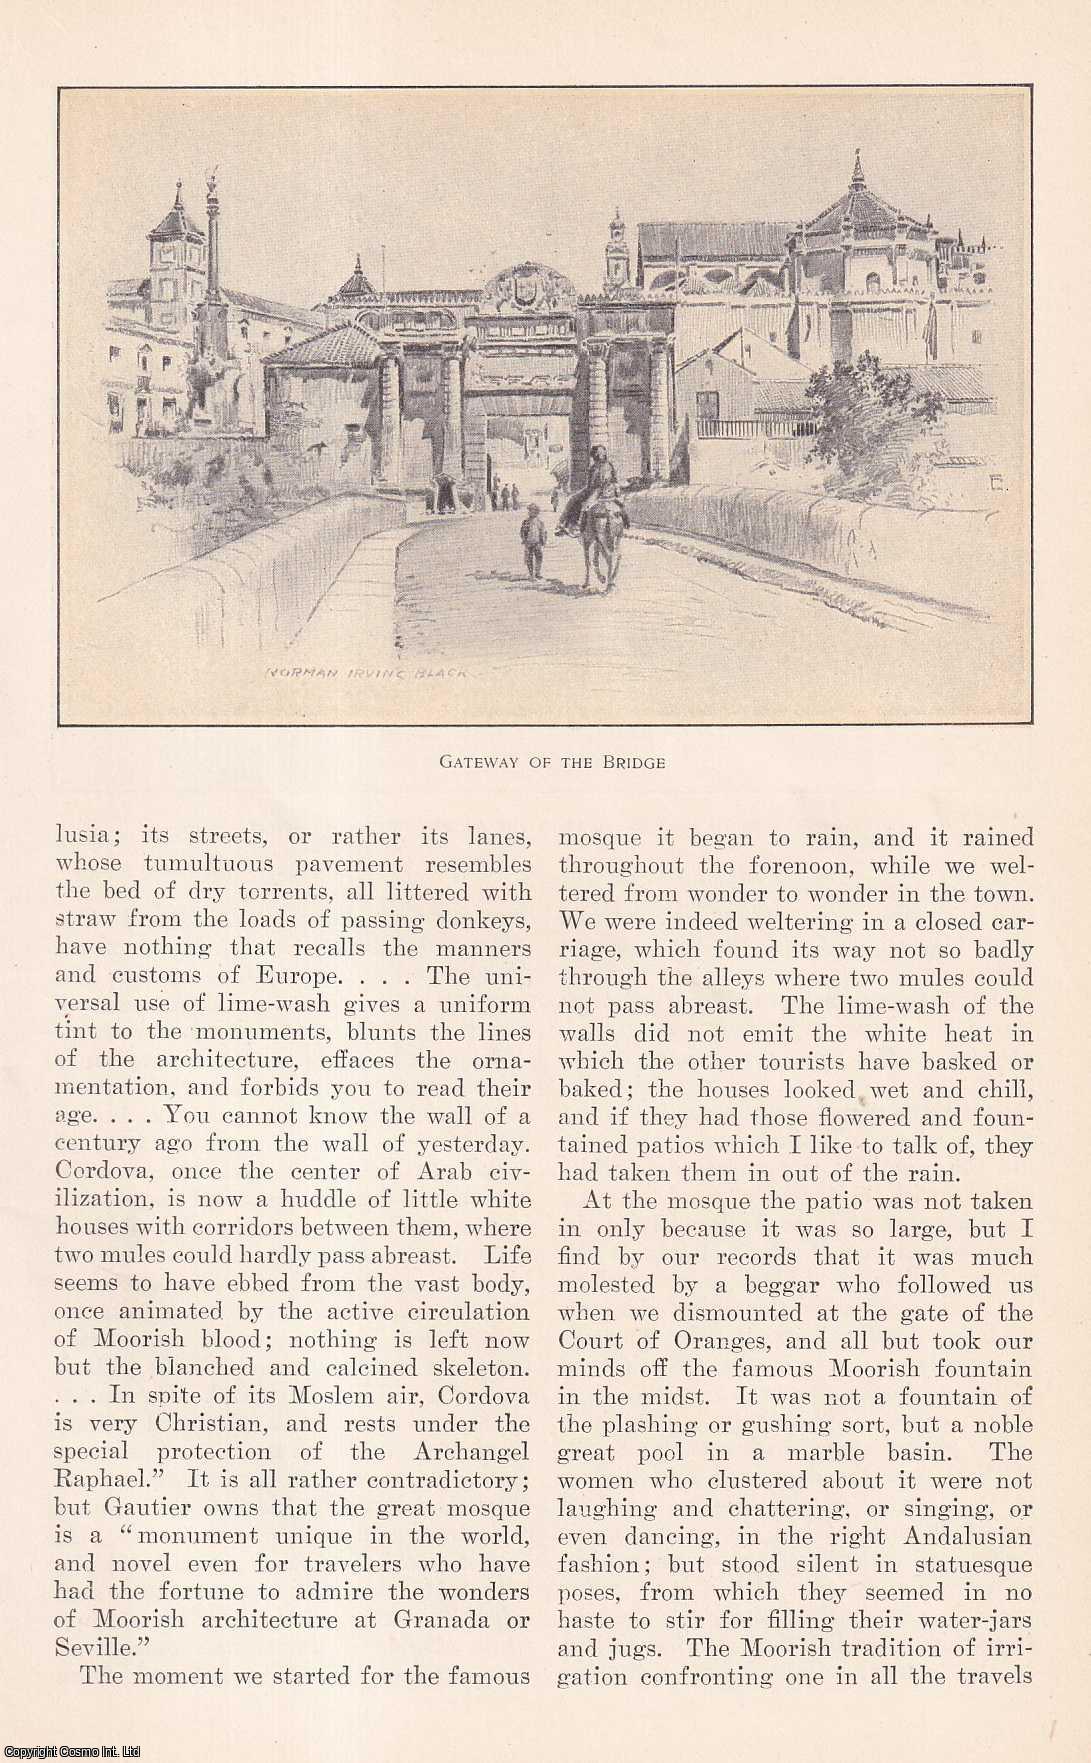 W.D. Howells - Cordova and the Way There. This is an original article from the Harper's Monthly Magazine, 1912.